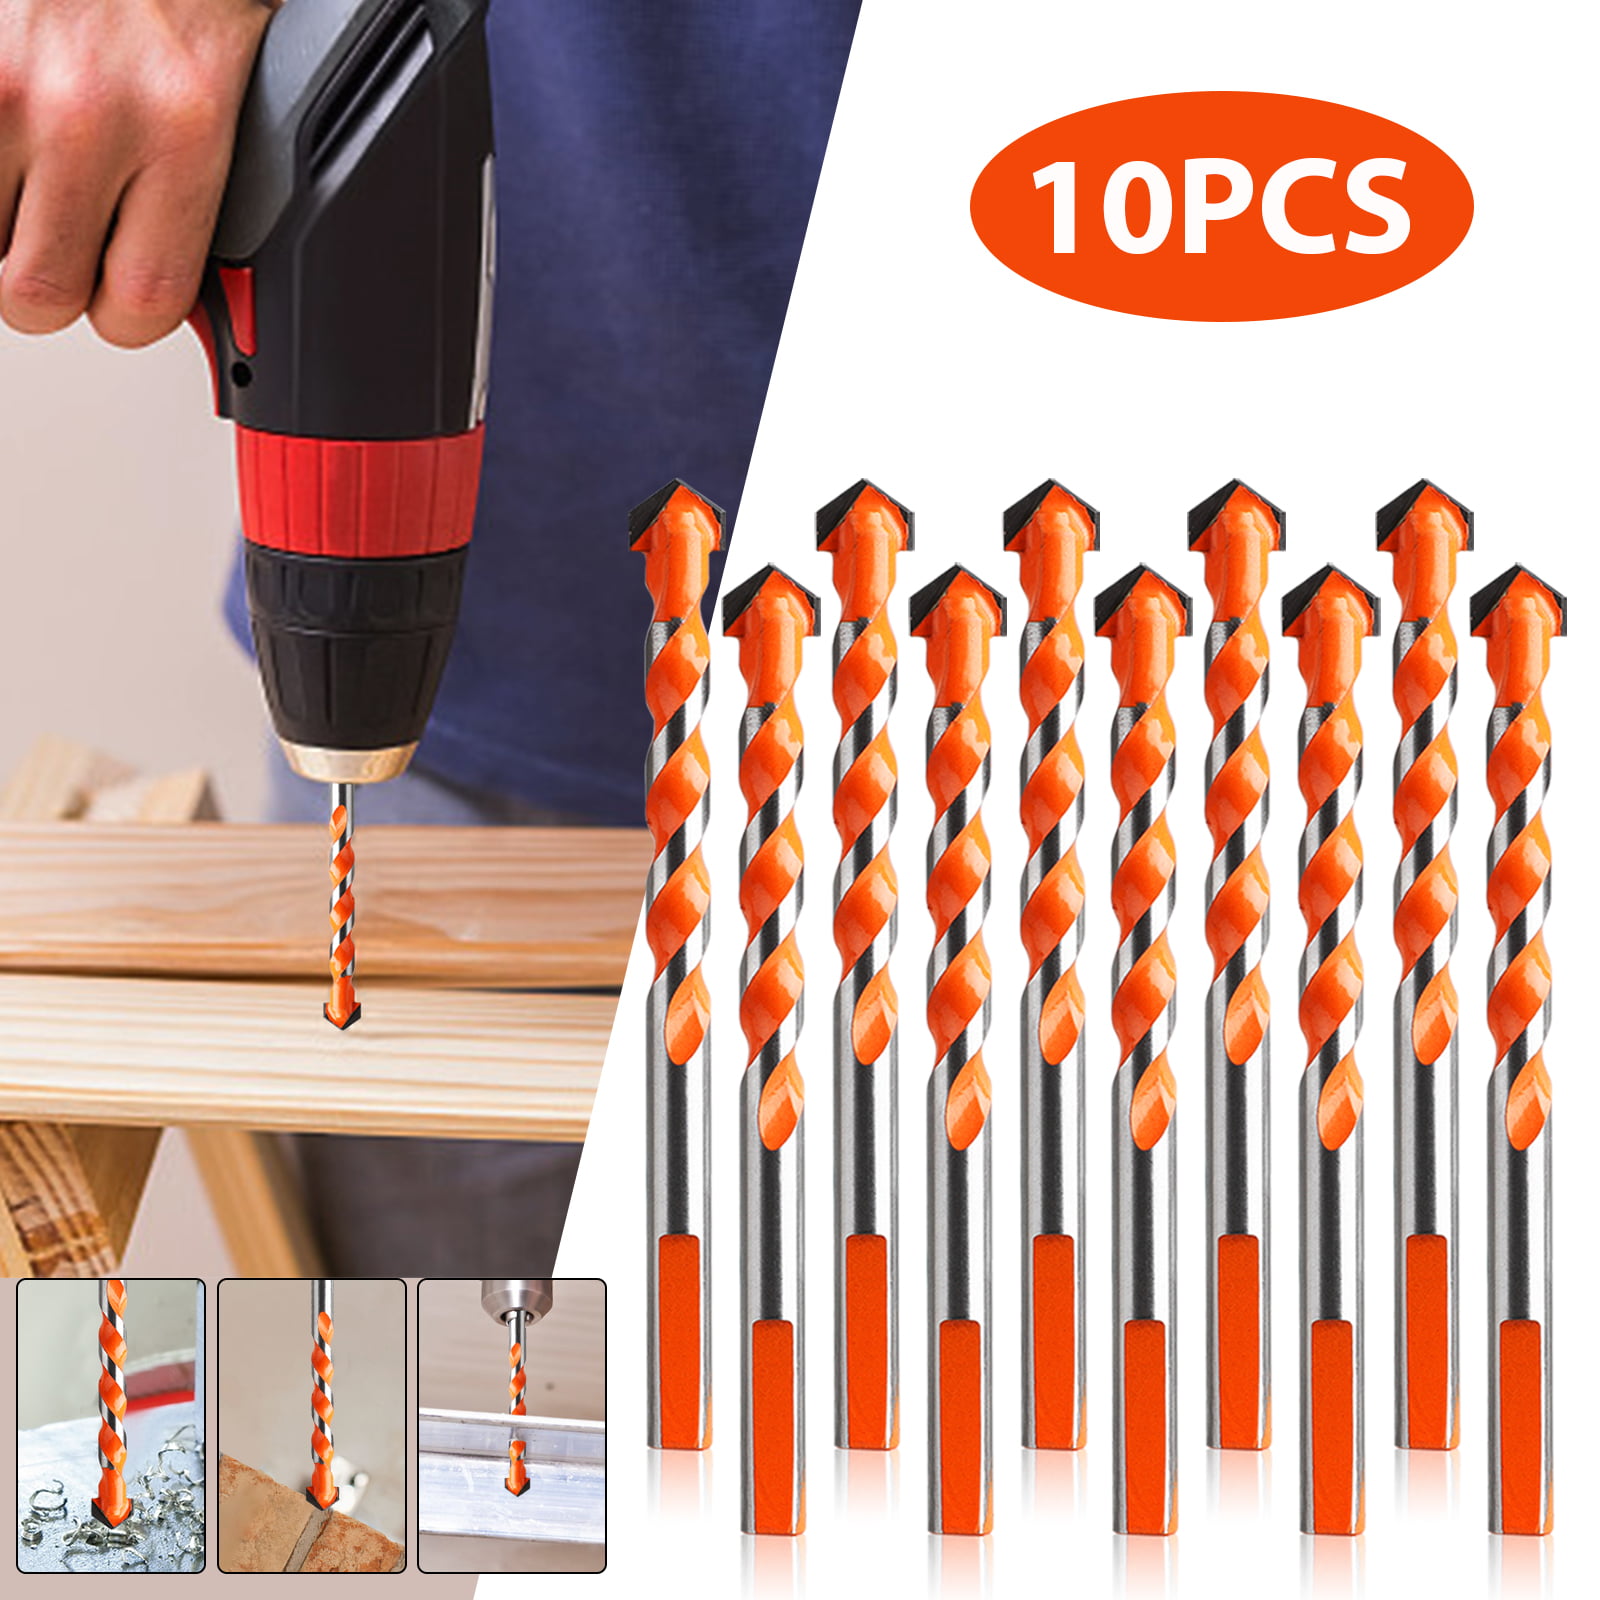 Handle Triangular-Overlord Drill Bits Multifunctional Tool Kit for Ceramic Tile 